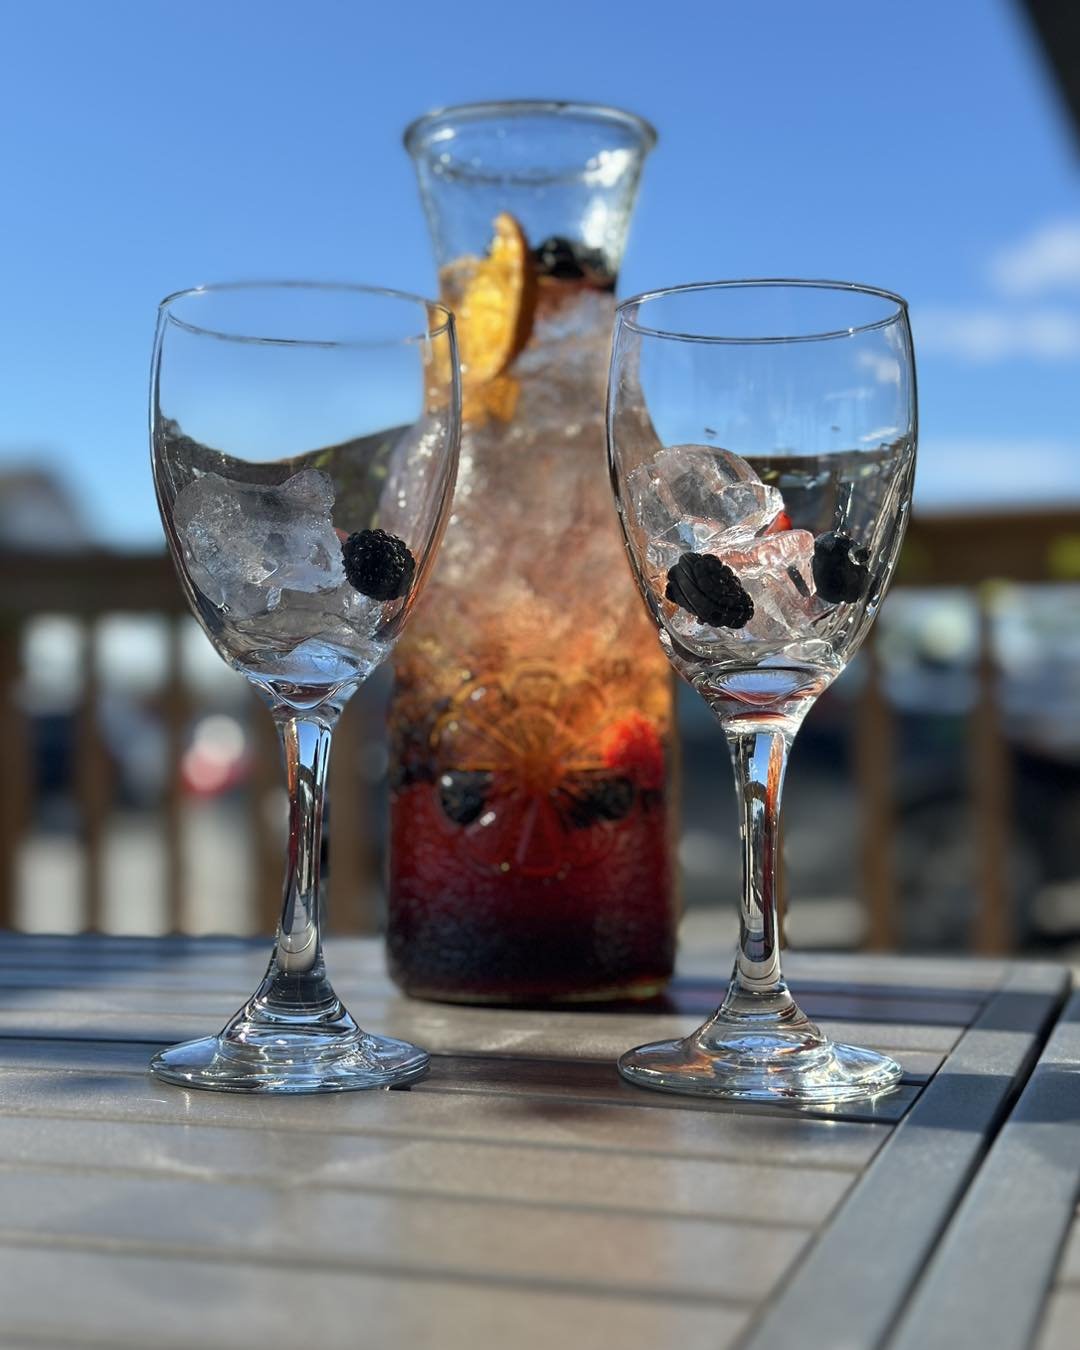 Patio Season is here at the Coyote&rsquo;s Patio. Soon to be called the Tiger&rsquo;s Den.  Find out why soon! 

When weather permits!  Join us on the patio with our Pitchers of Sangria Special!  #patio #patioseason #coyotesyellowknife #coyotesdining